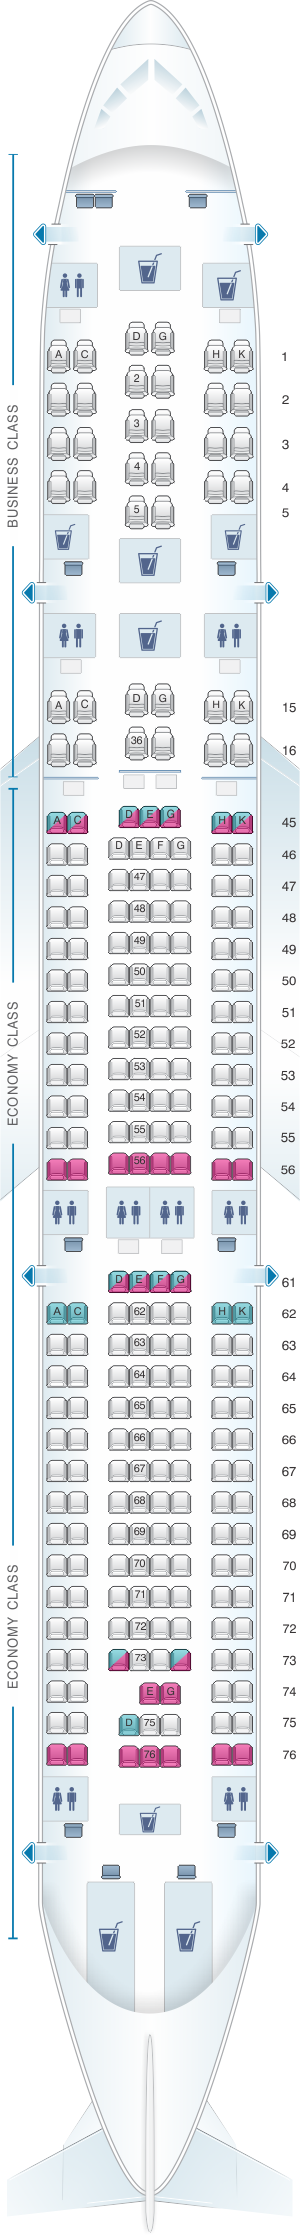 Seat Map South African Airways Airbus A340 300 V1 | SeatMaestro